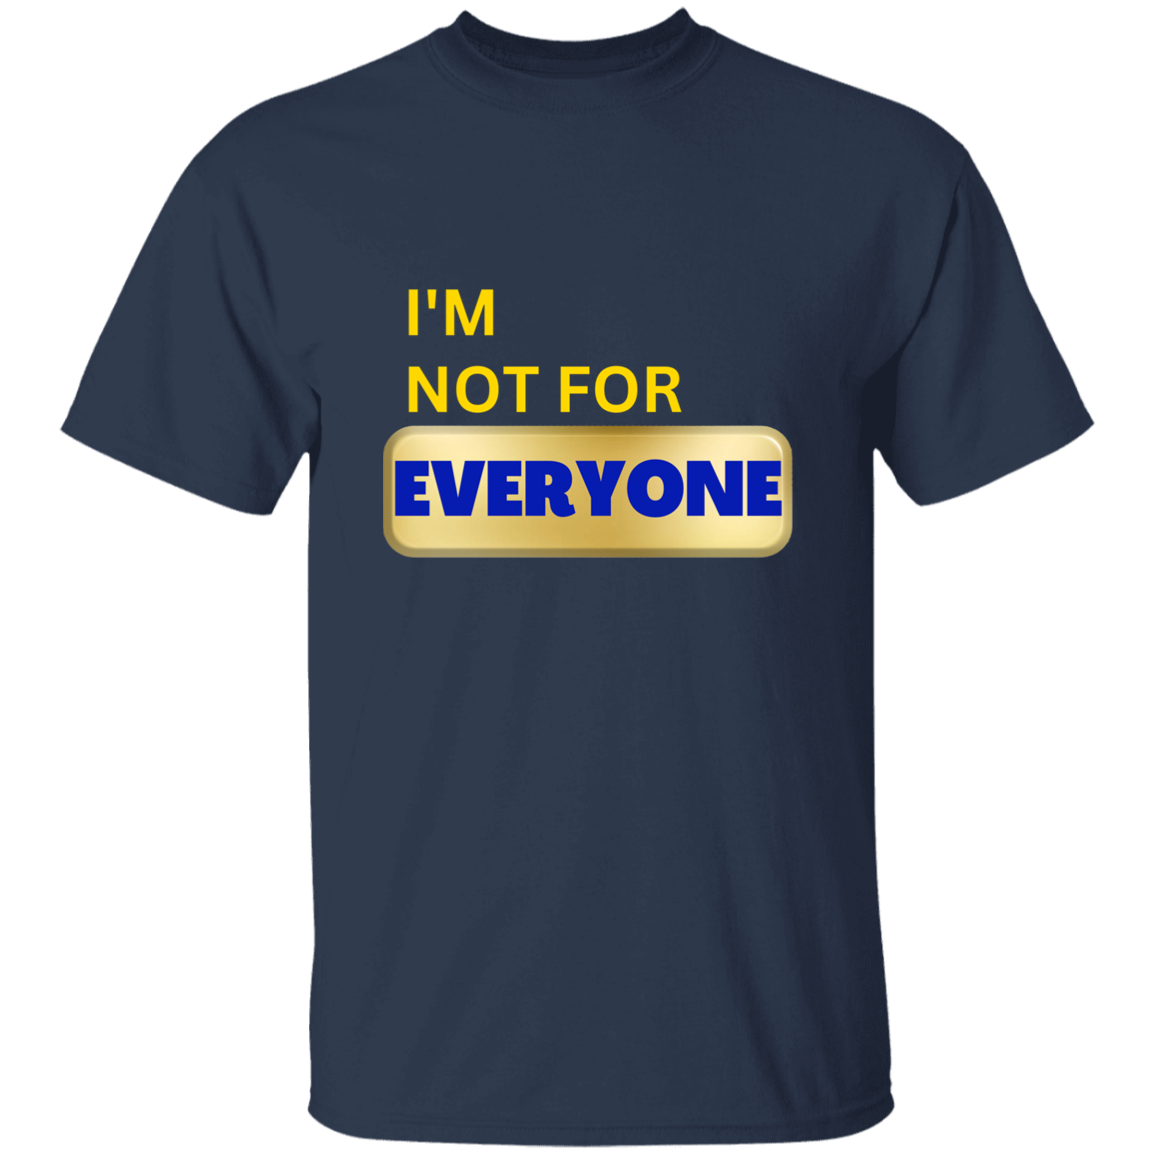 I'm Not For Everyone 5.3 oz. T-Shirt